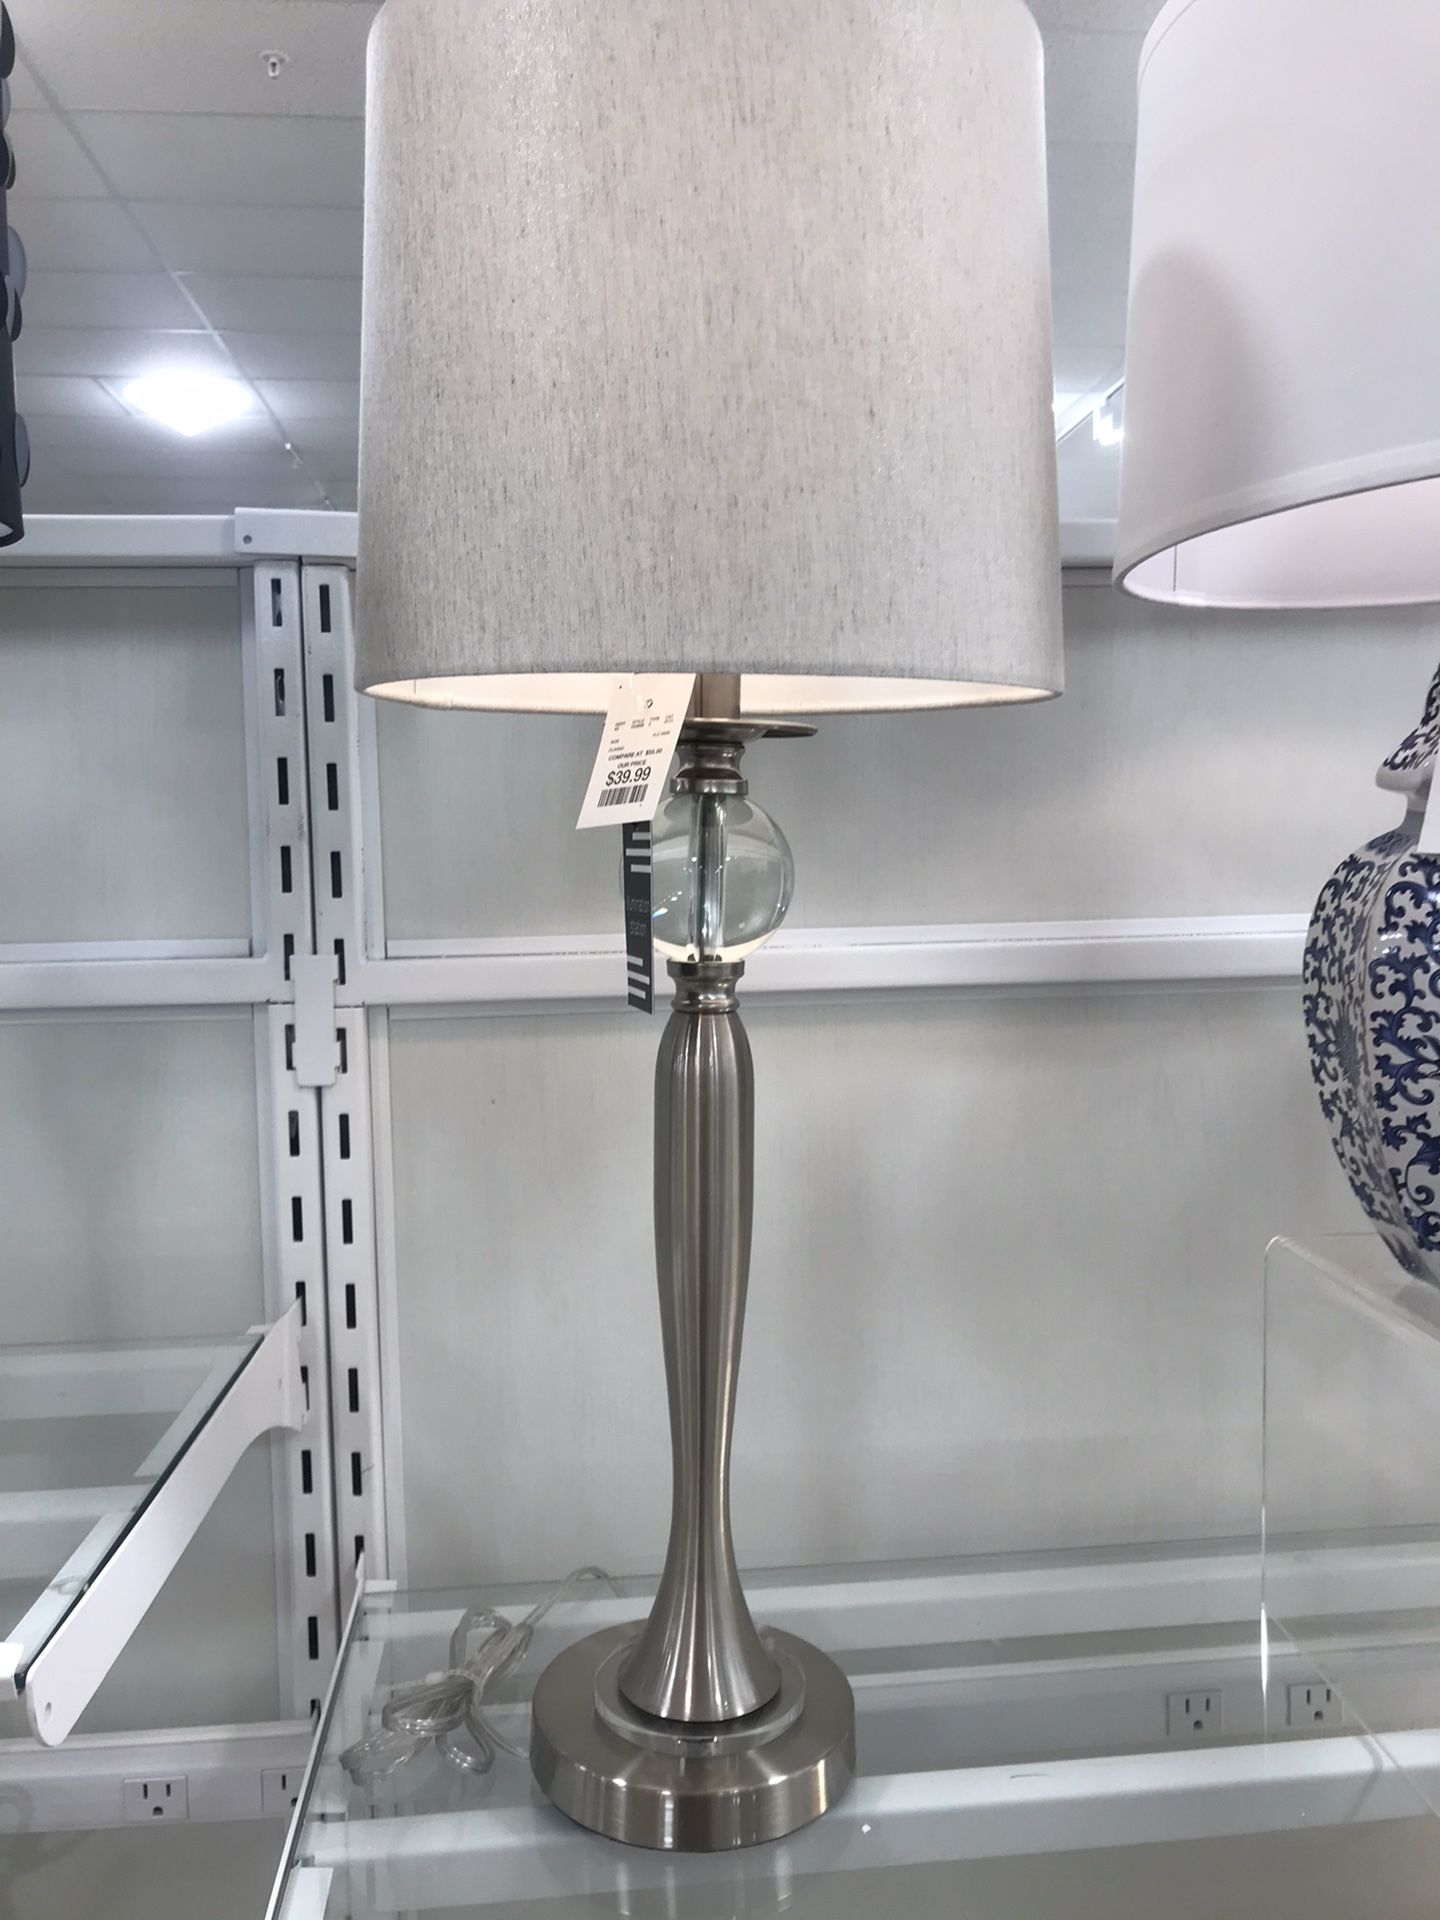 (New) 2 Silver Lamps With Cream Lame Shade